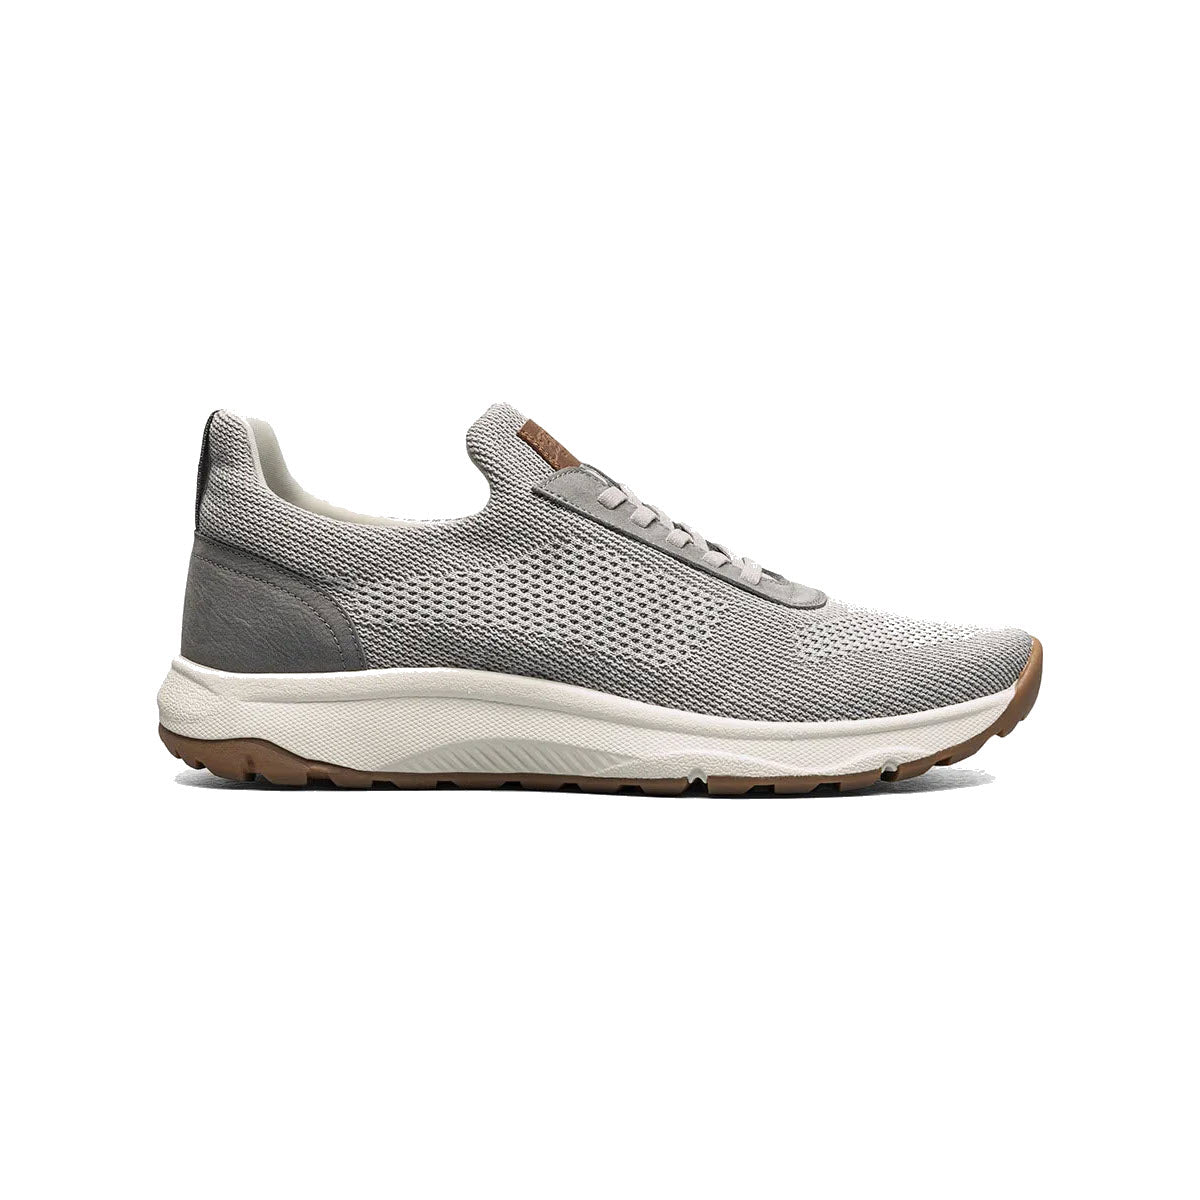 A side view of a Florsheim Satellite Knit Elastic Slip On Sneaker Gray - Mens with a white sole and brown accents on a plain white background.